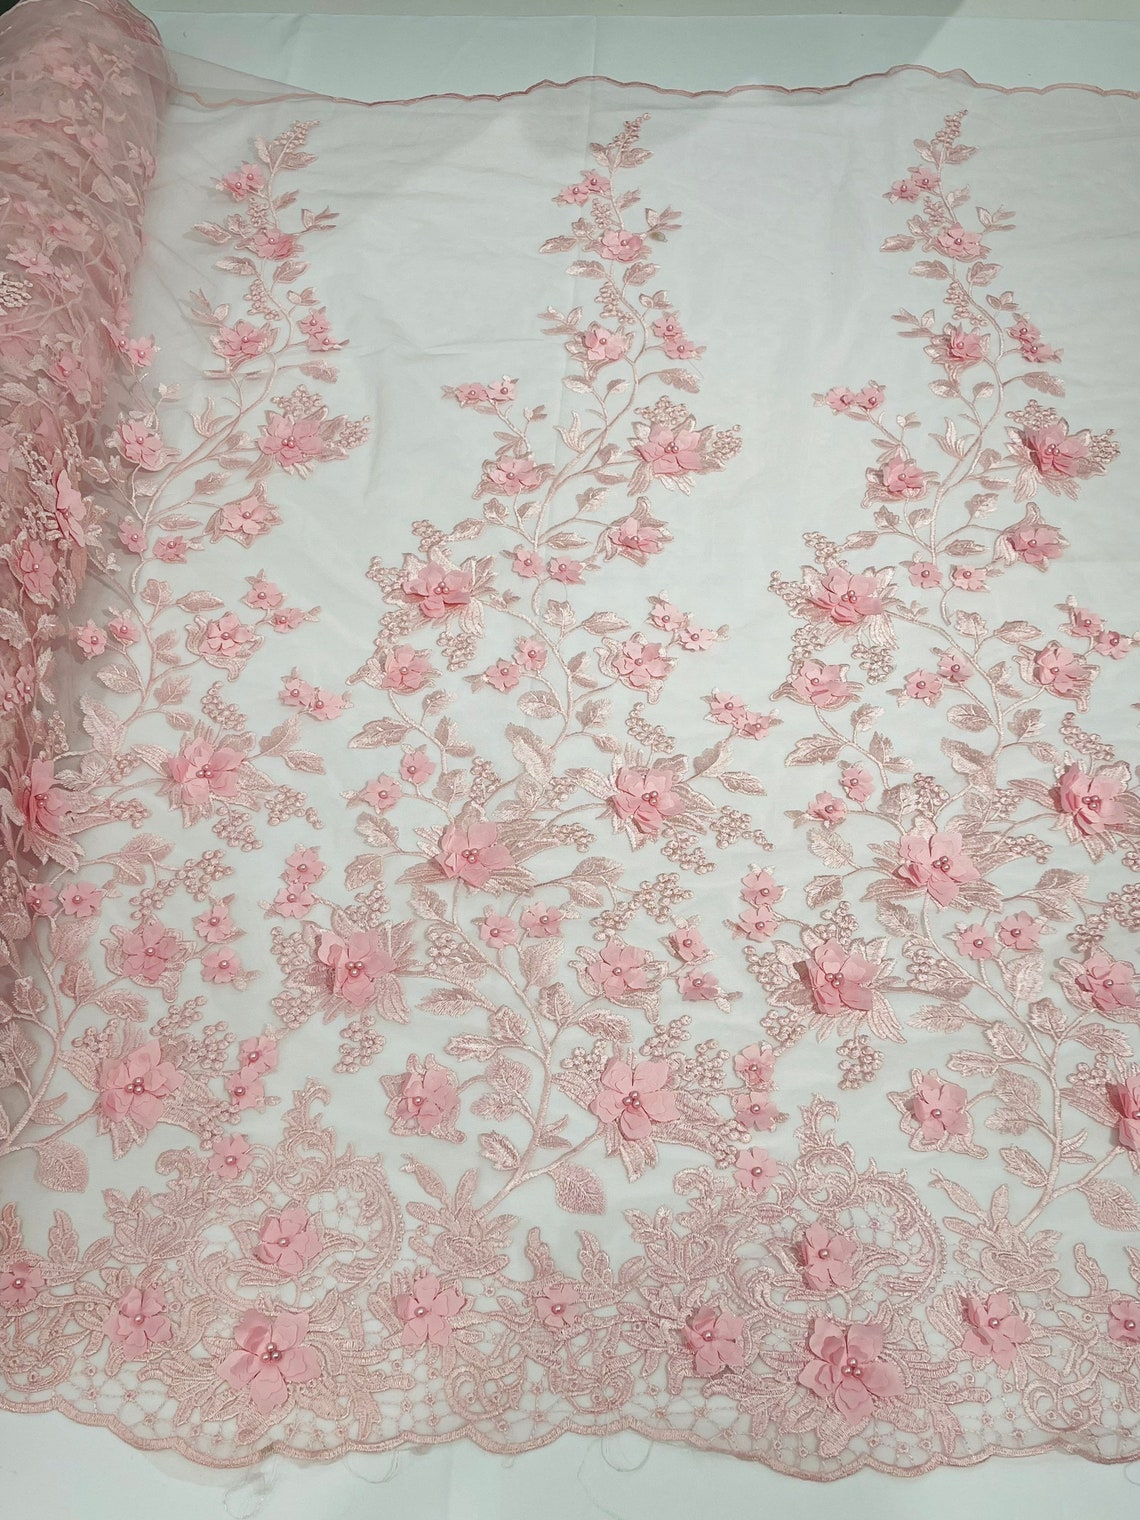 3D Floral Princess Fabric - Pink - Embroidered Floral Lace Fabric with 3D Flowers By Yard